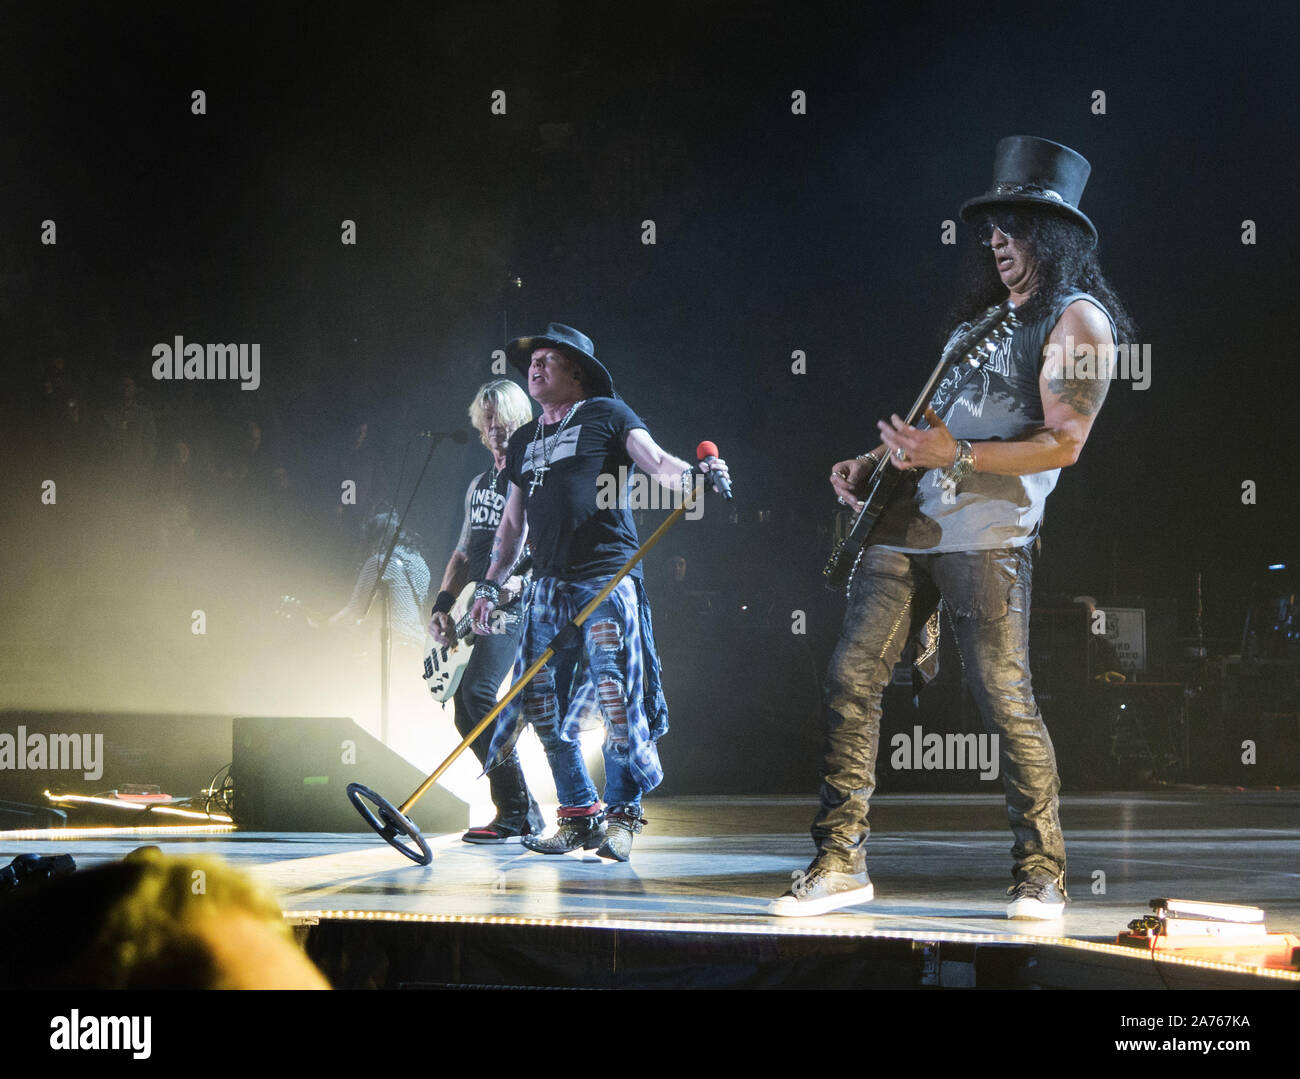 [Video] Guns N' Roses lanza la serie de conciertos en Streaming. October-29-2019-salt-lake-city-ut-usa-bassist-duff-mckagan-left-singer-axl-rose-and-guitarist-slash-of-the-rock-band-guns-n-roses-perform-live-onstage-during-a-concert-on-their-the-not-in-this-lifetime-tour-at-the-vivint-smart-home-arena-credit-image-kc-alfredzuma-wire-2A767KA